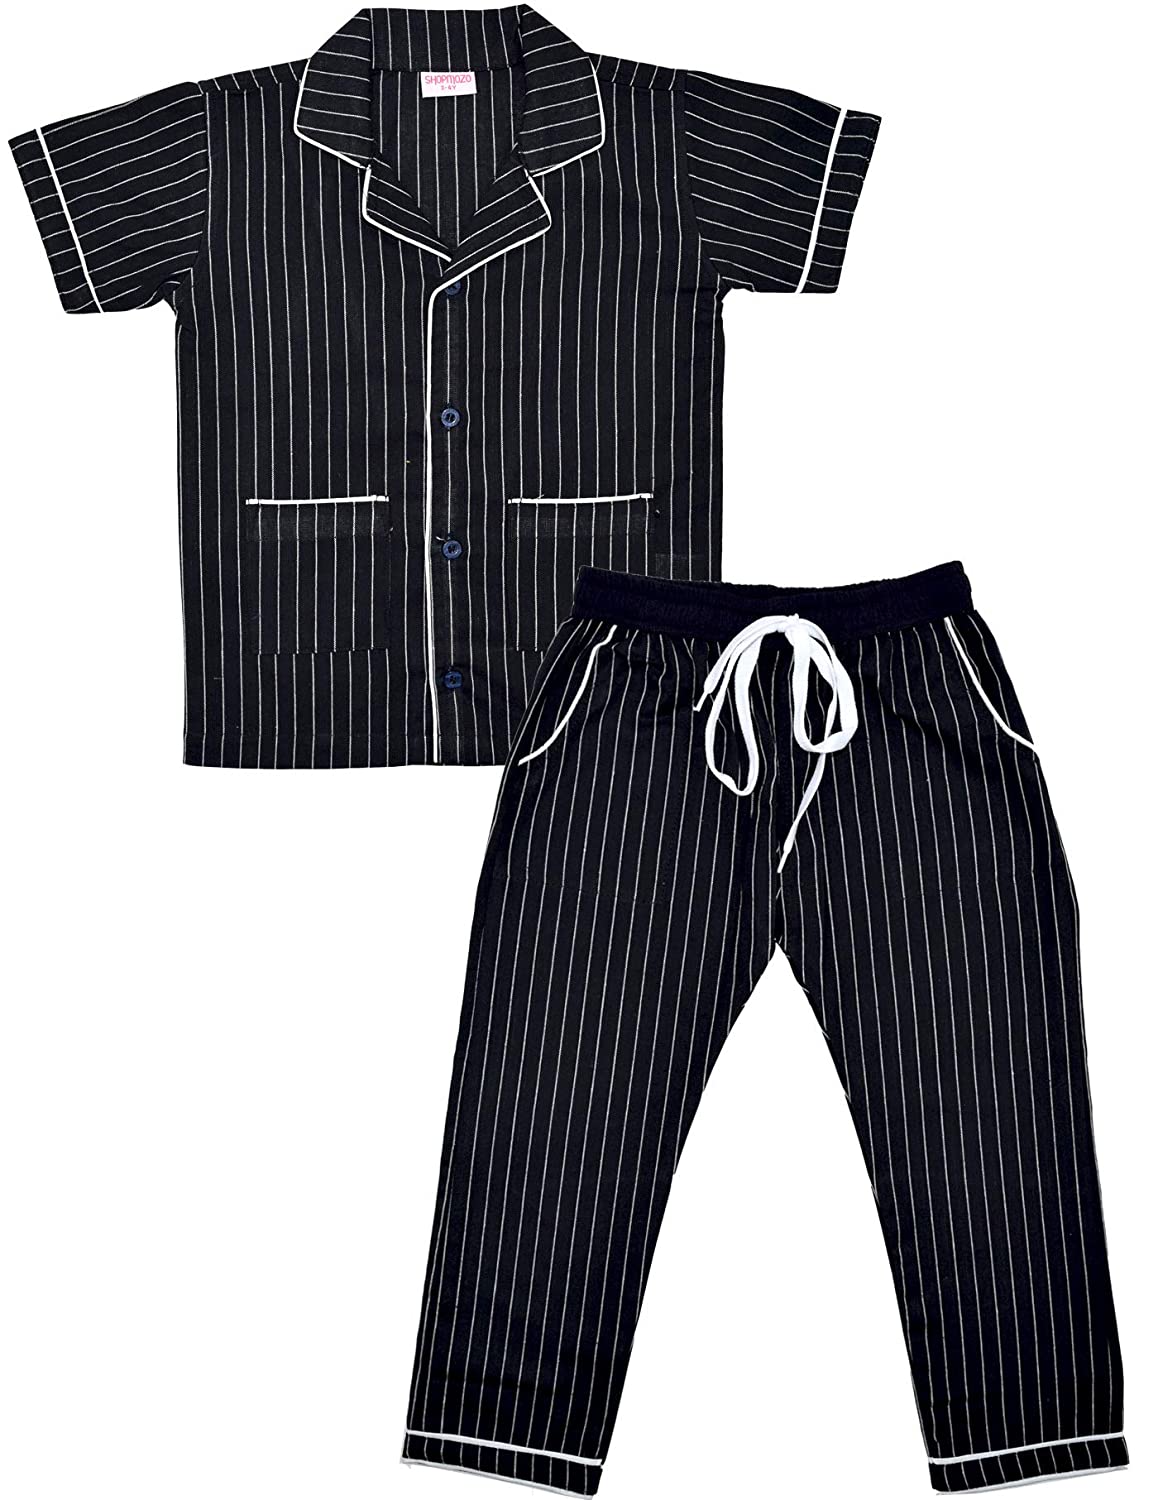 ML IMPORTED NIGHT SUIT & CO-RD SET COMBO